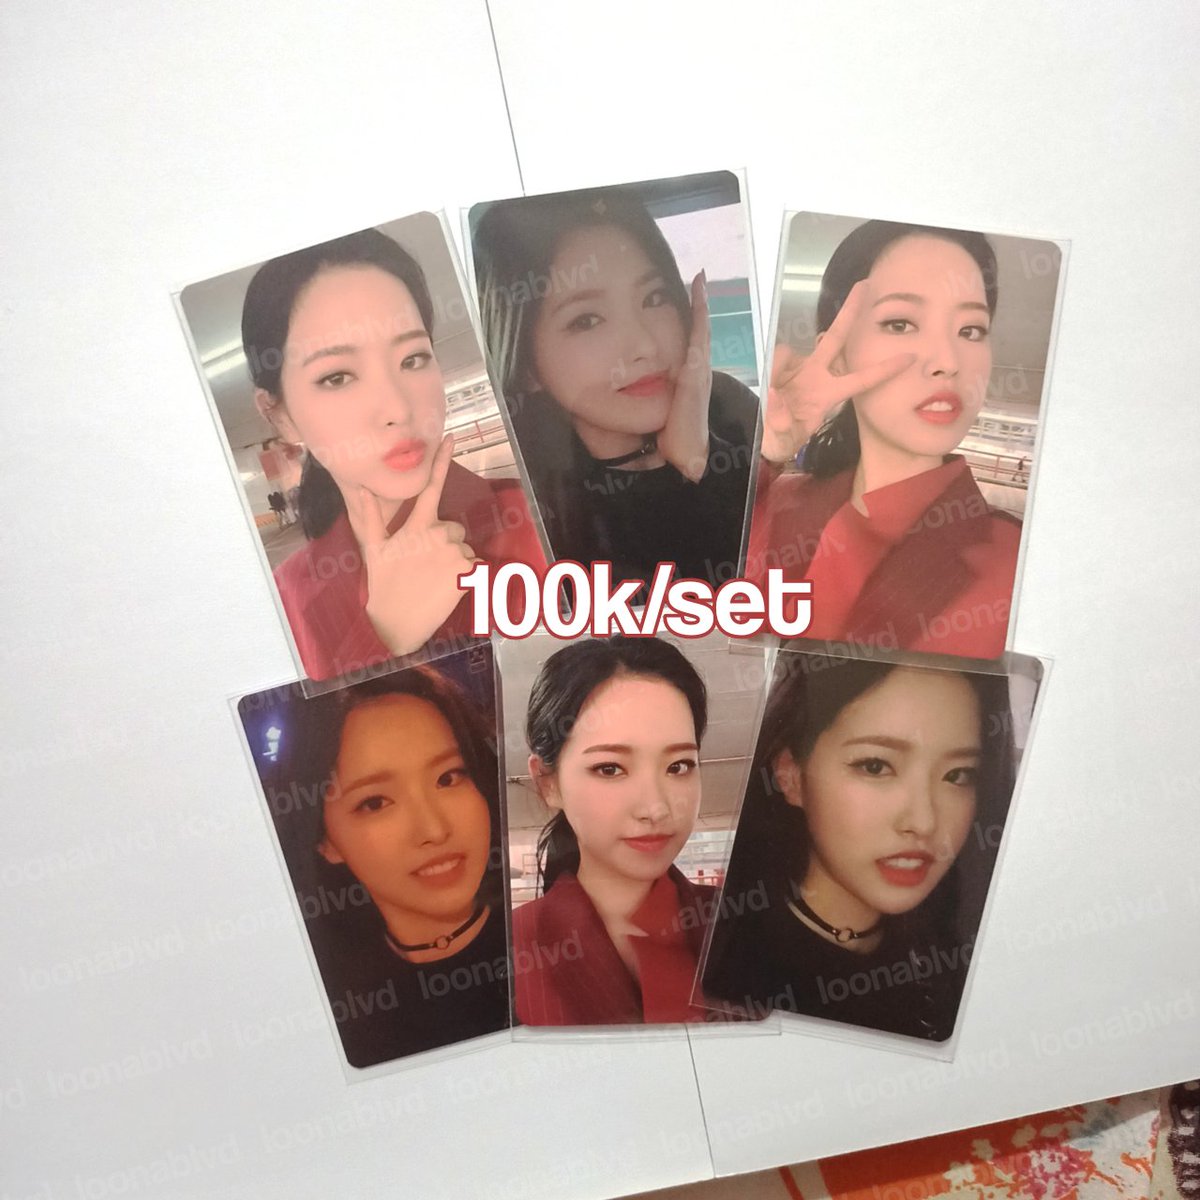 (RTs are appreciated!)
౨ৎ  ┈┈ WTS HYEJU PCS
❤️ Pair 1 pc, with other Hyeju or next twt
📍 Depok, Jawa Barat

✔️ Keep event
✔️ Shopee gratong xtra
✔️ Ww buyers allowed with INA address

t. loona loossemble benefit 이달의소녀 혜주 양도 #ตลาดนัดloona #pasarloona photocard 포카 ina